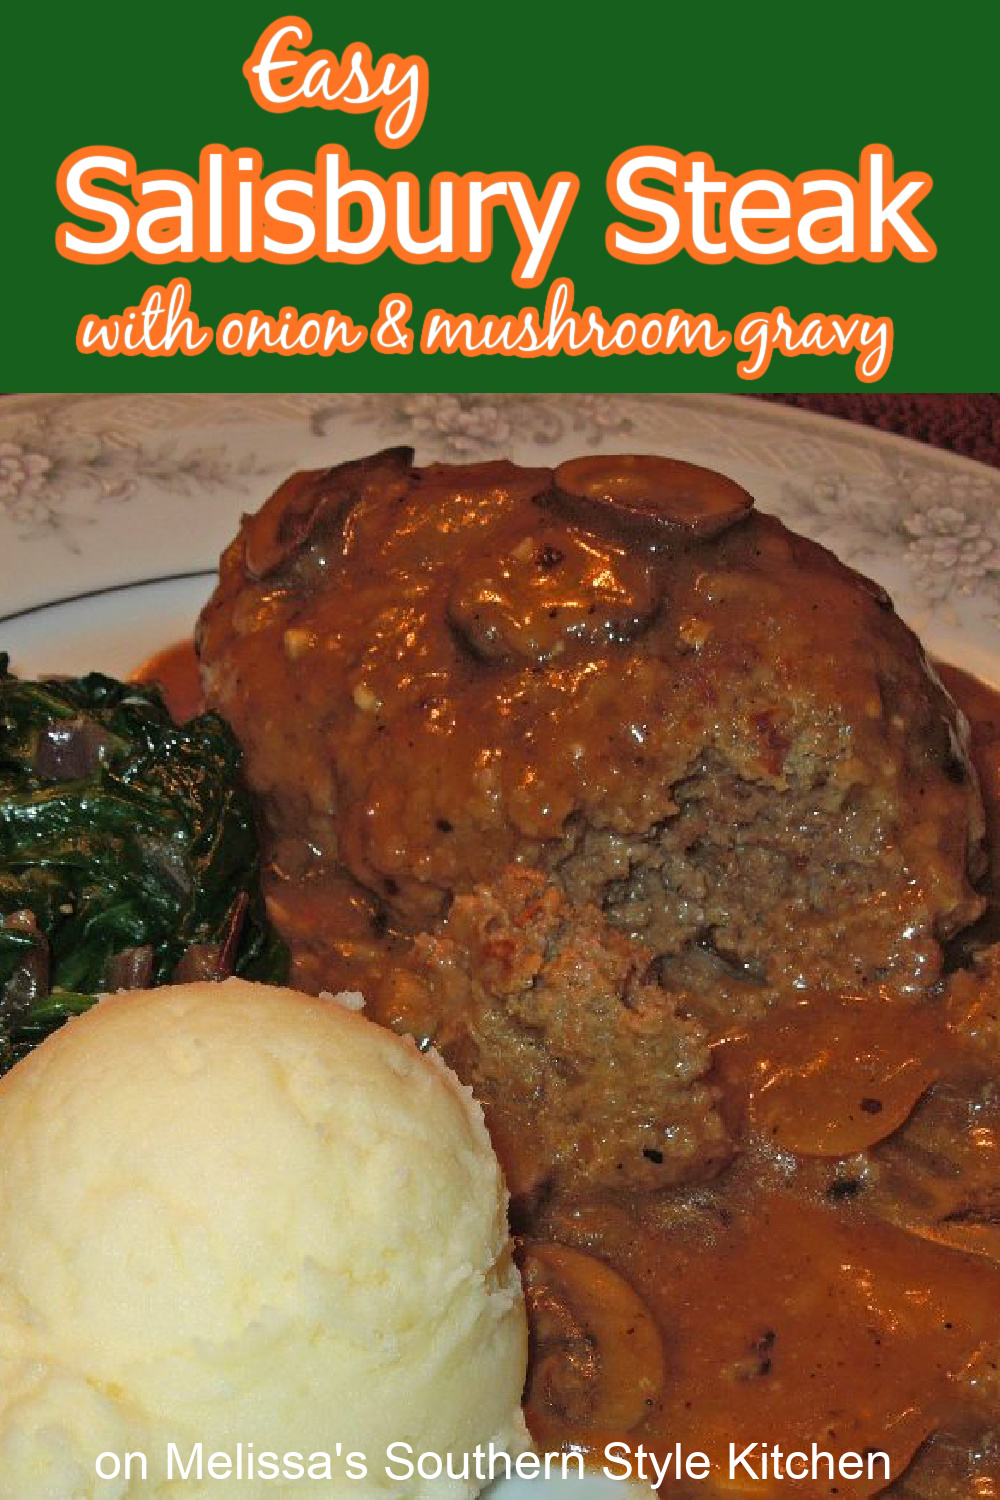 Salisbury Steak with Onion and Mushroom Gravy is comfort food you can make at home #salisburysteak #gravy #onionmushroomgravy #mushrooms #comfortfoodrecipes #easyrecipes #food #recipes #dinnerideas #groundbeefrecipes #beef #easygroundbeefrecipes #southernfood #southernrecipes #melissassouthernstylekitchen